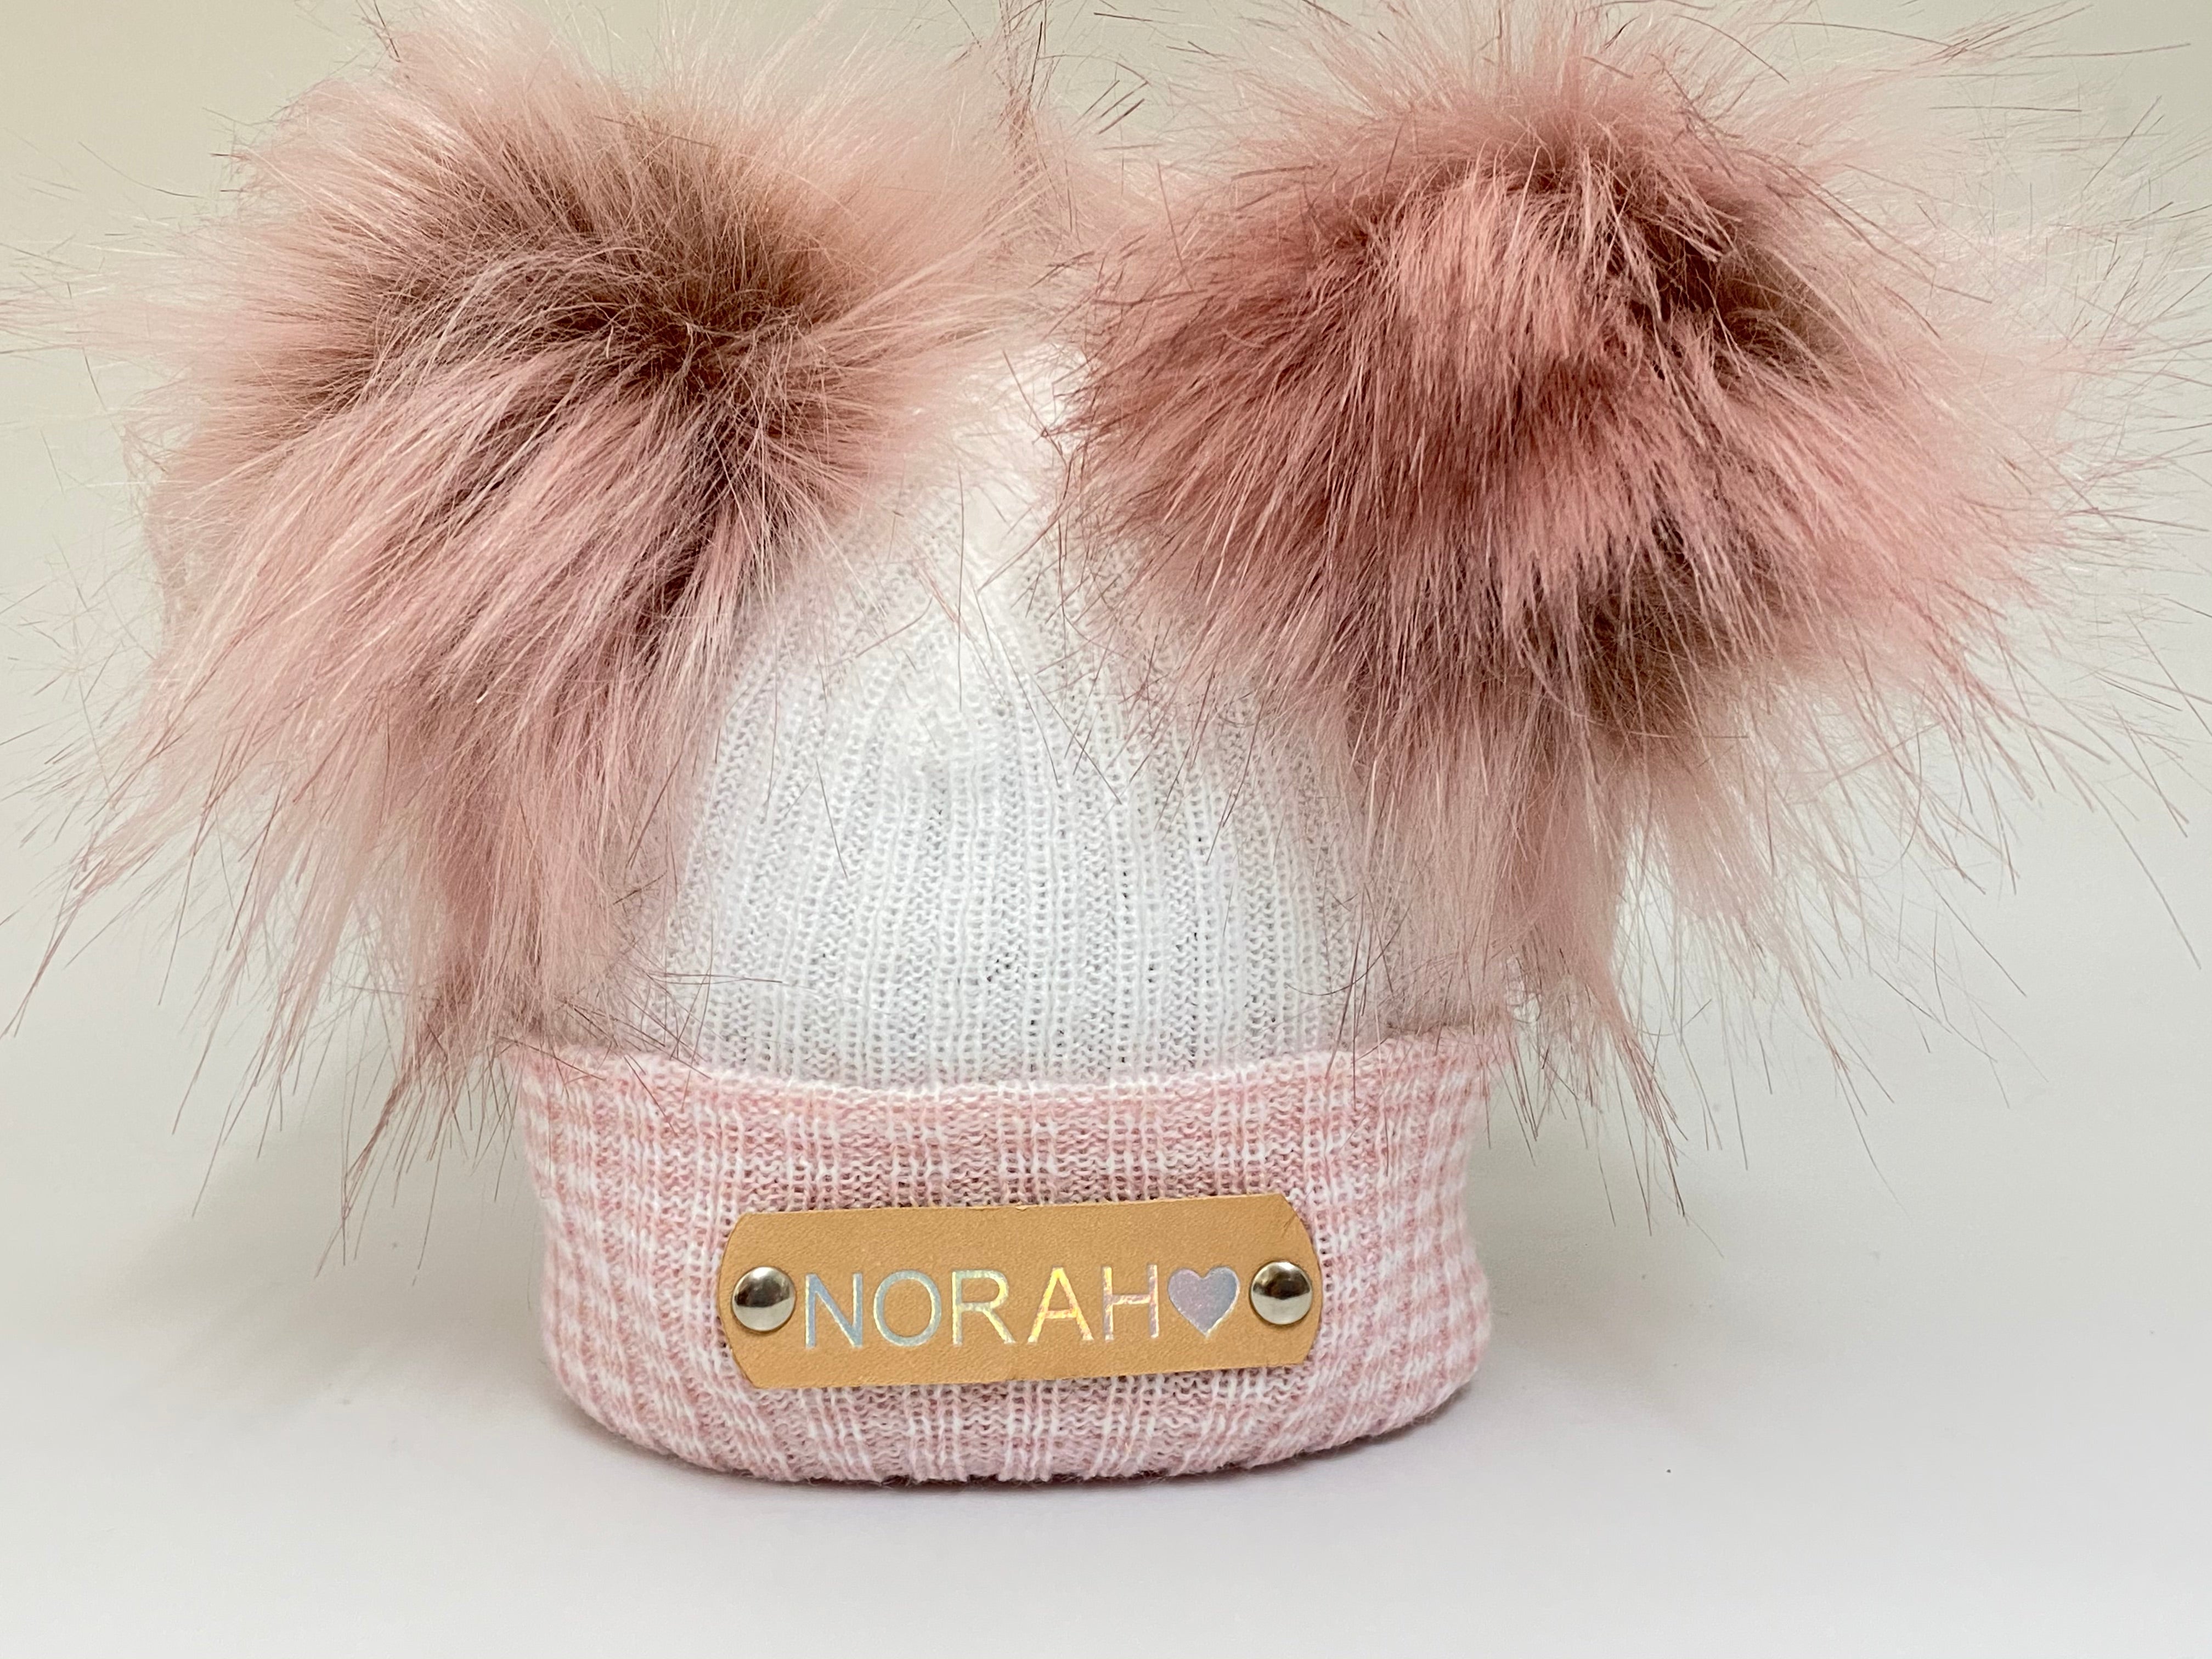 Double Pom Pom Pink & White Striped Knitted Baby Hat